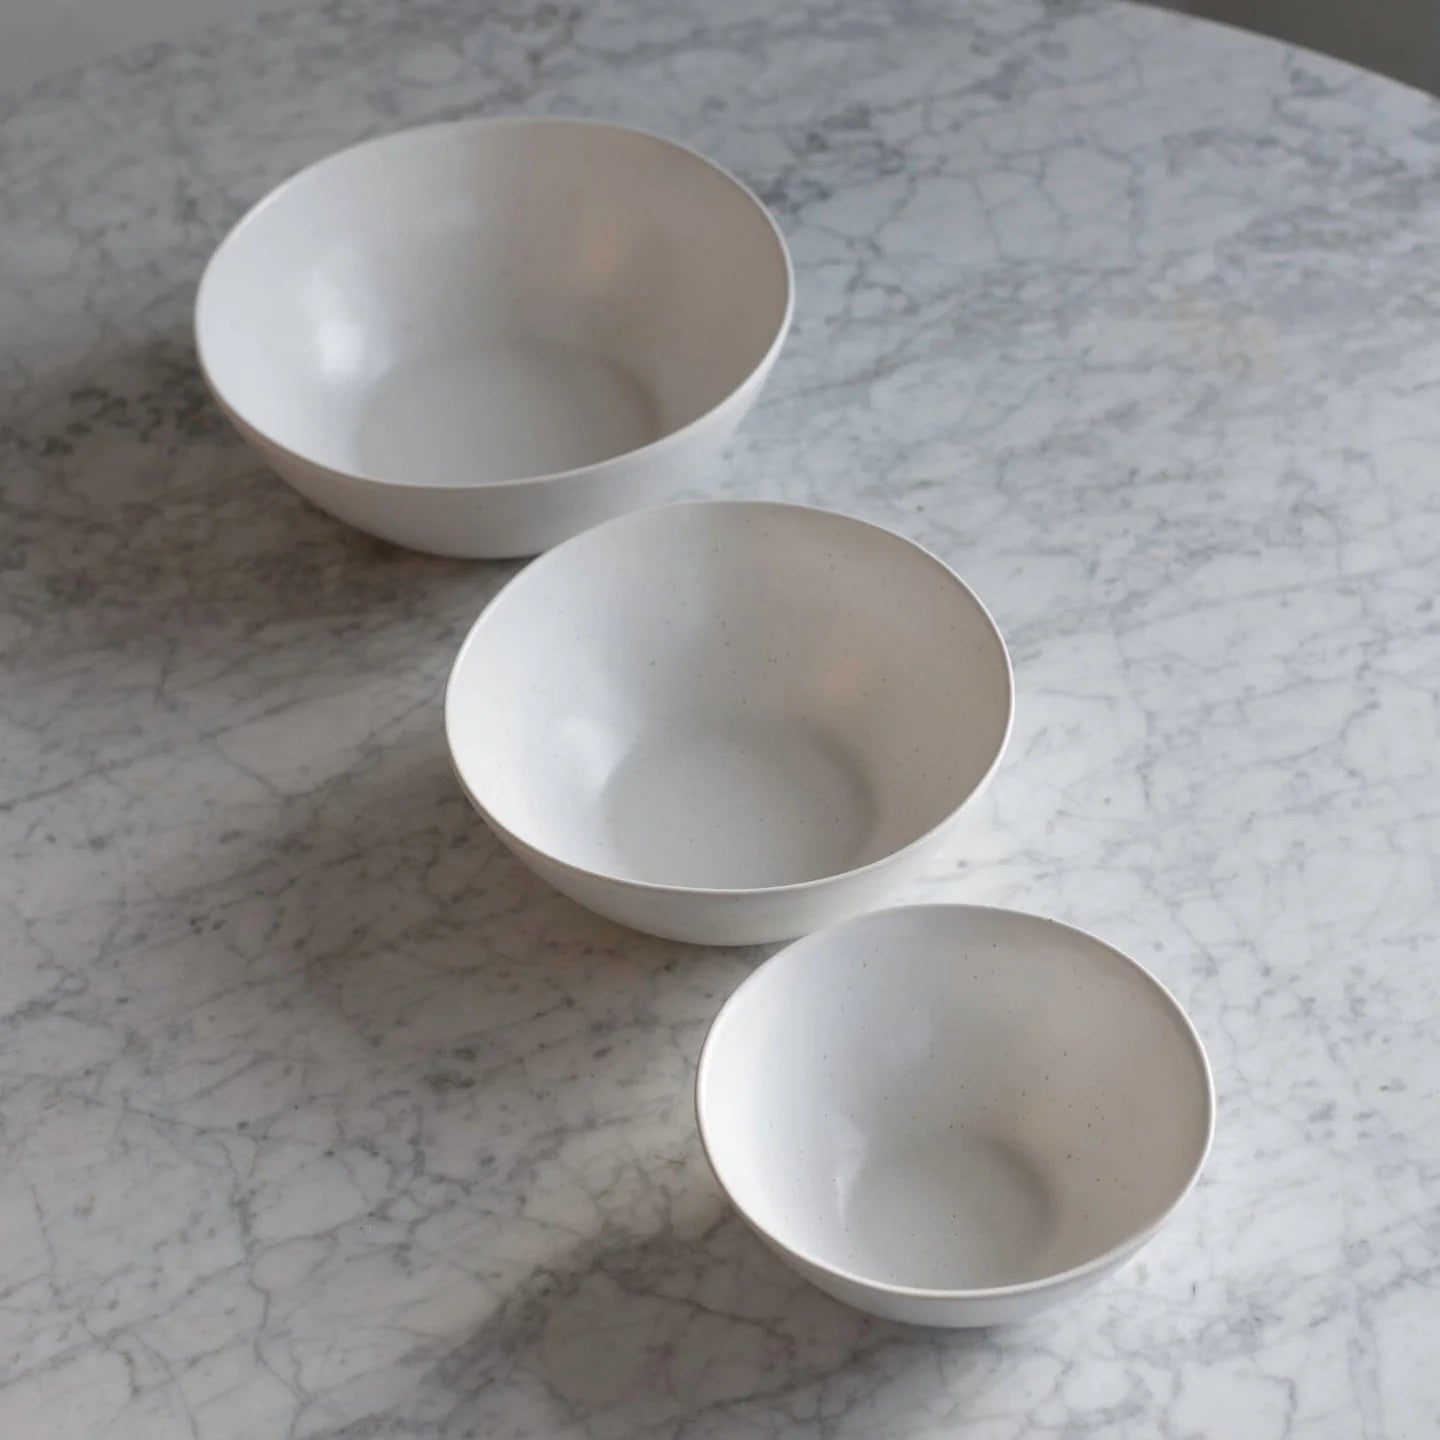 The Nested Serving Bowls - Speckled White